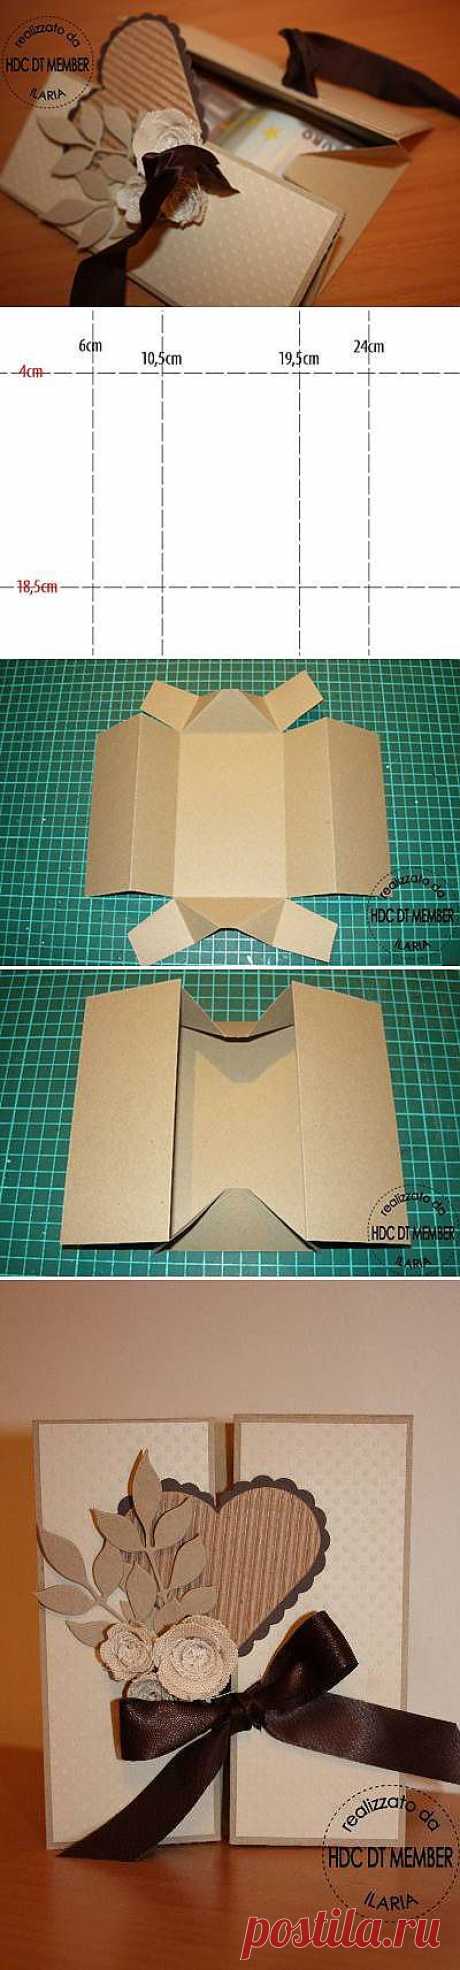 How to make Beautiful Envelope step by step DIY instructions | How To Instructions